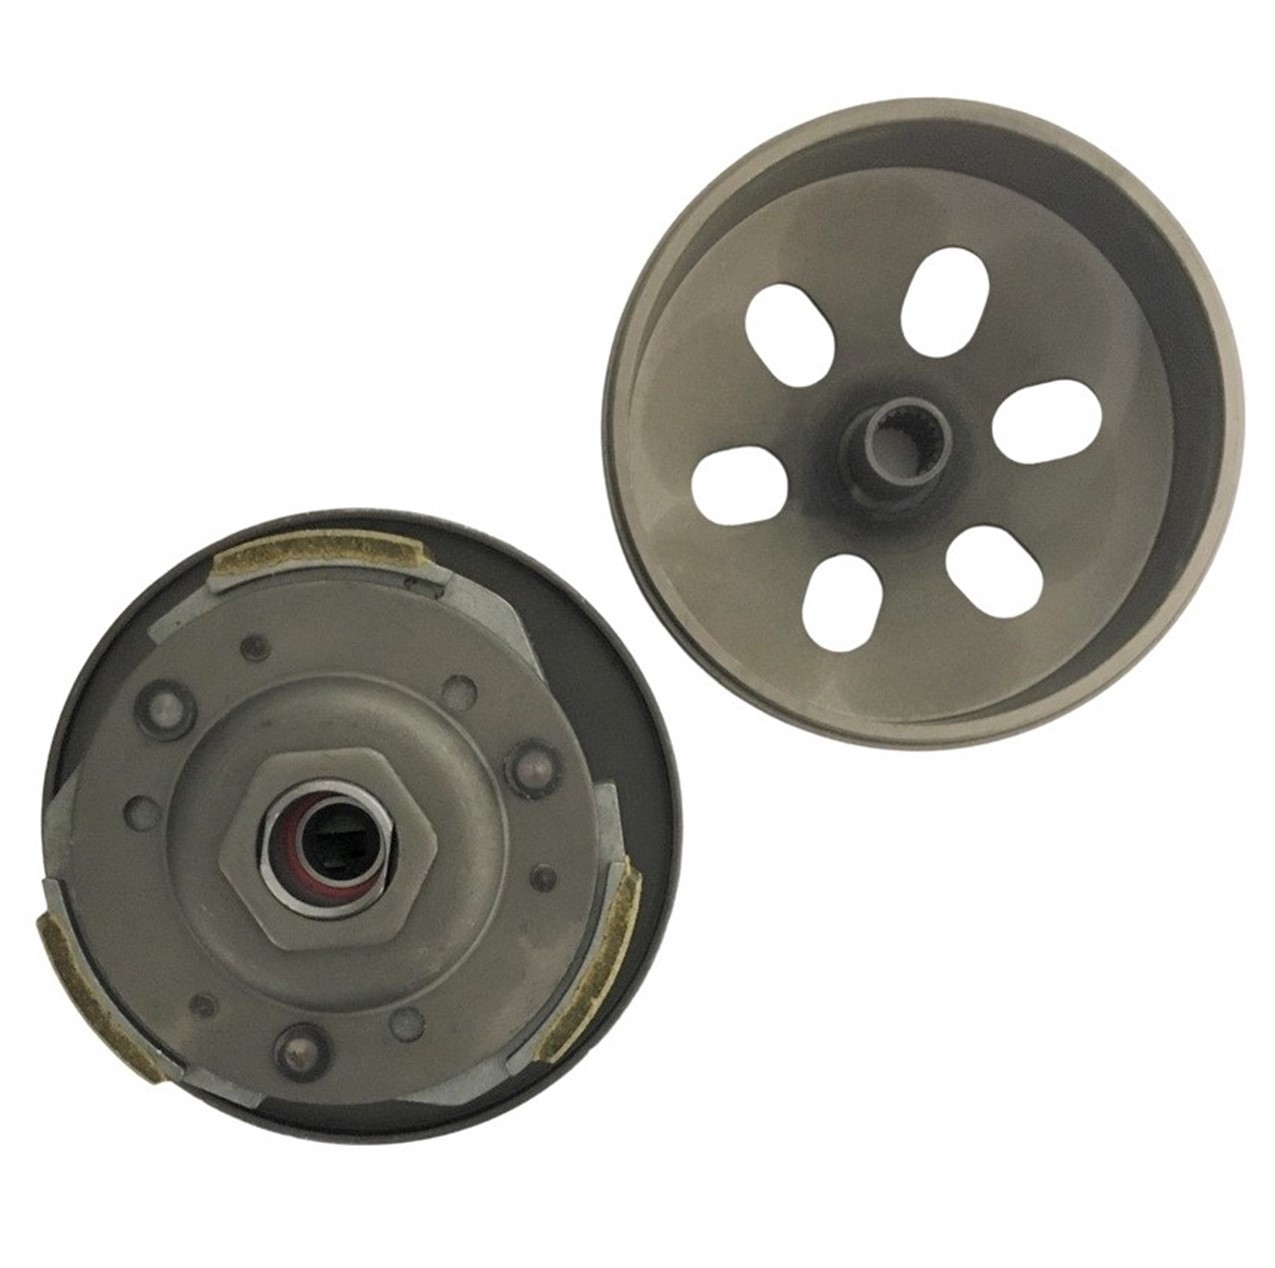 Rear Drive Clutch-Driven Pulley GY6-125, GY6-150 Chinese ATVs, GoKarts, Scooters Bell ID=125mm, Shaft =15mm, Splines=19